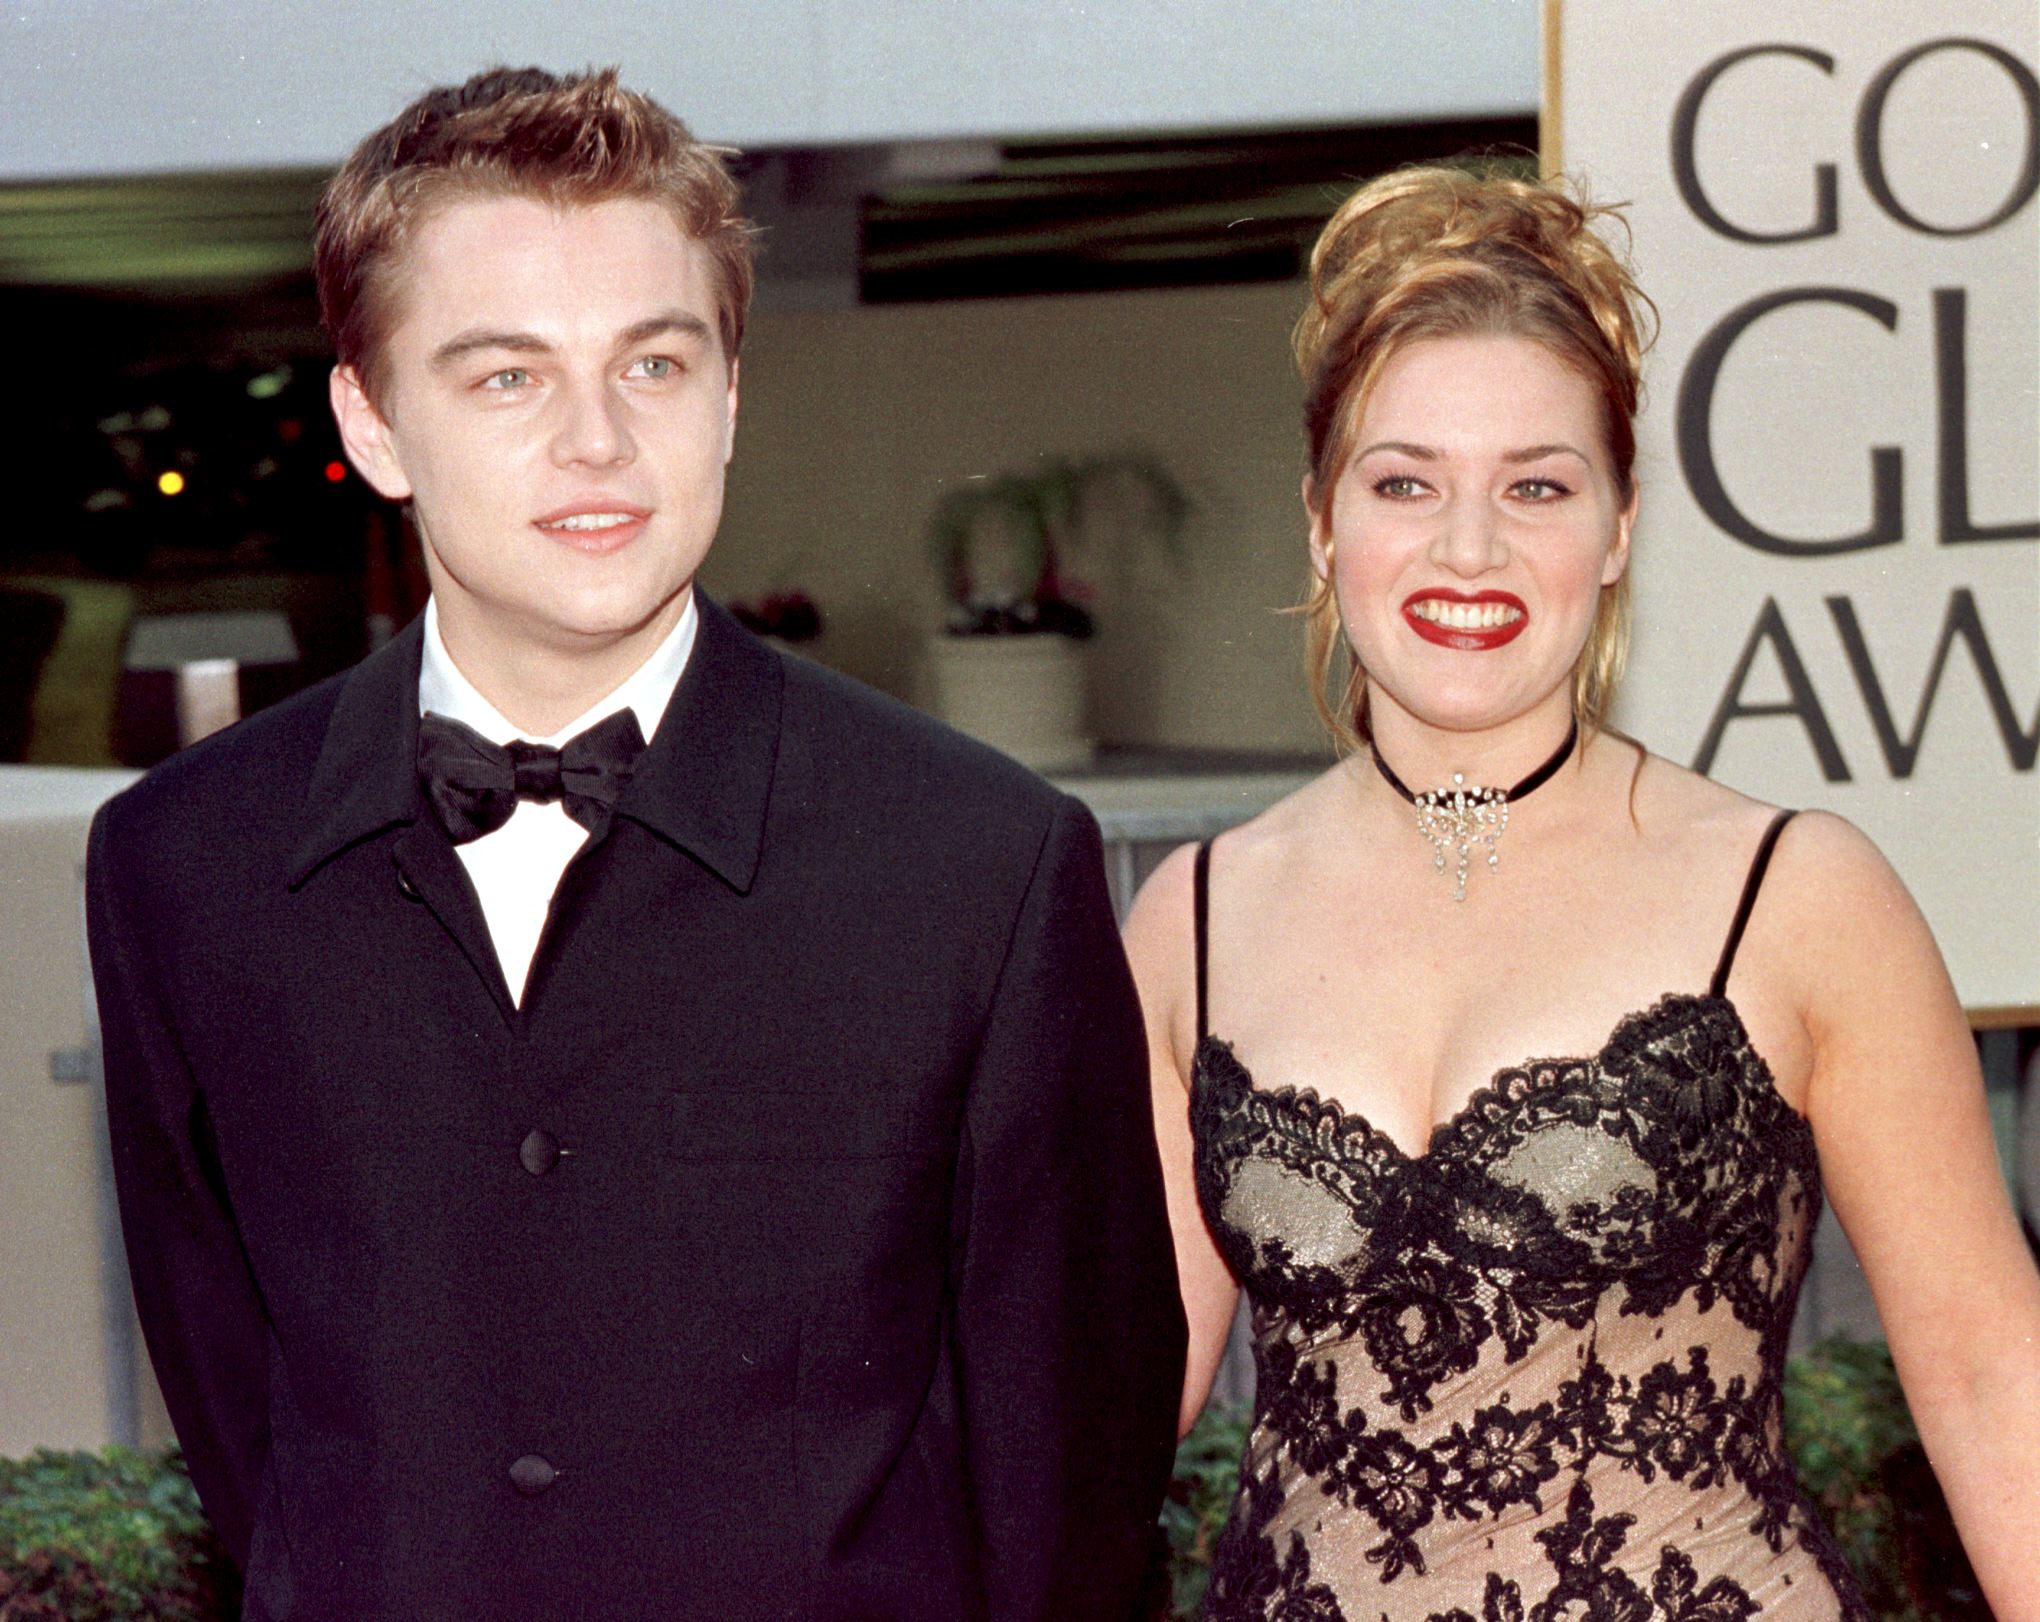 Leonardo DiCaprio Out Winslet While Filming 'Titanic'